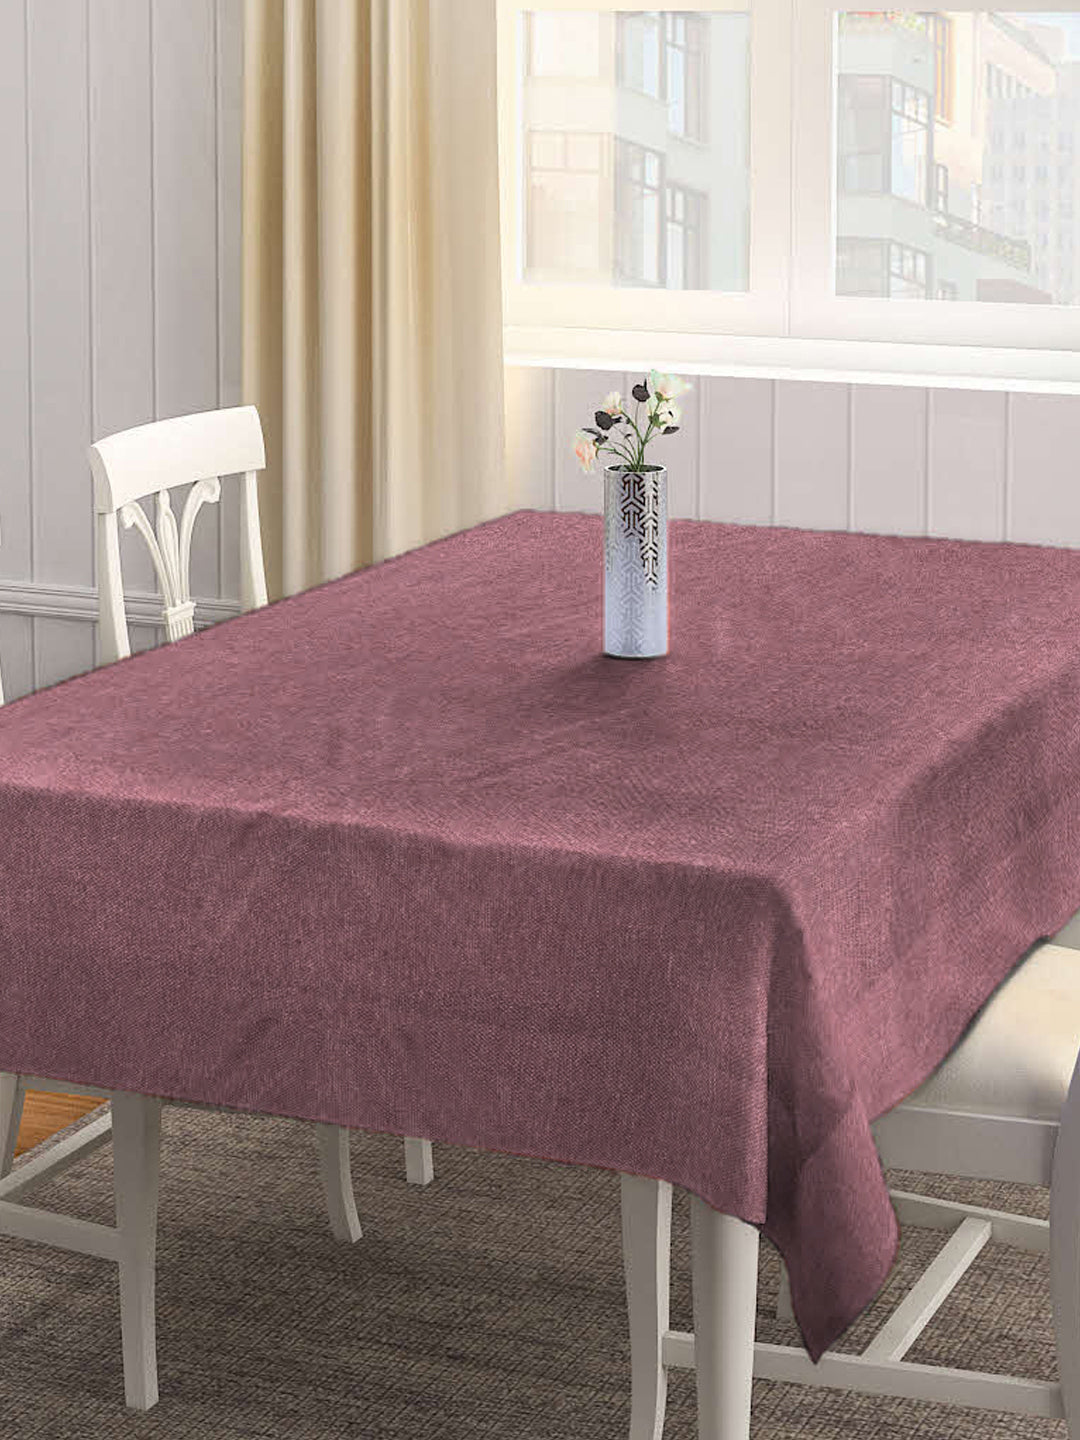 Klotthe Rust Floral Cotton Blend 6 Seater Rectangular Table Cover